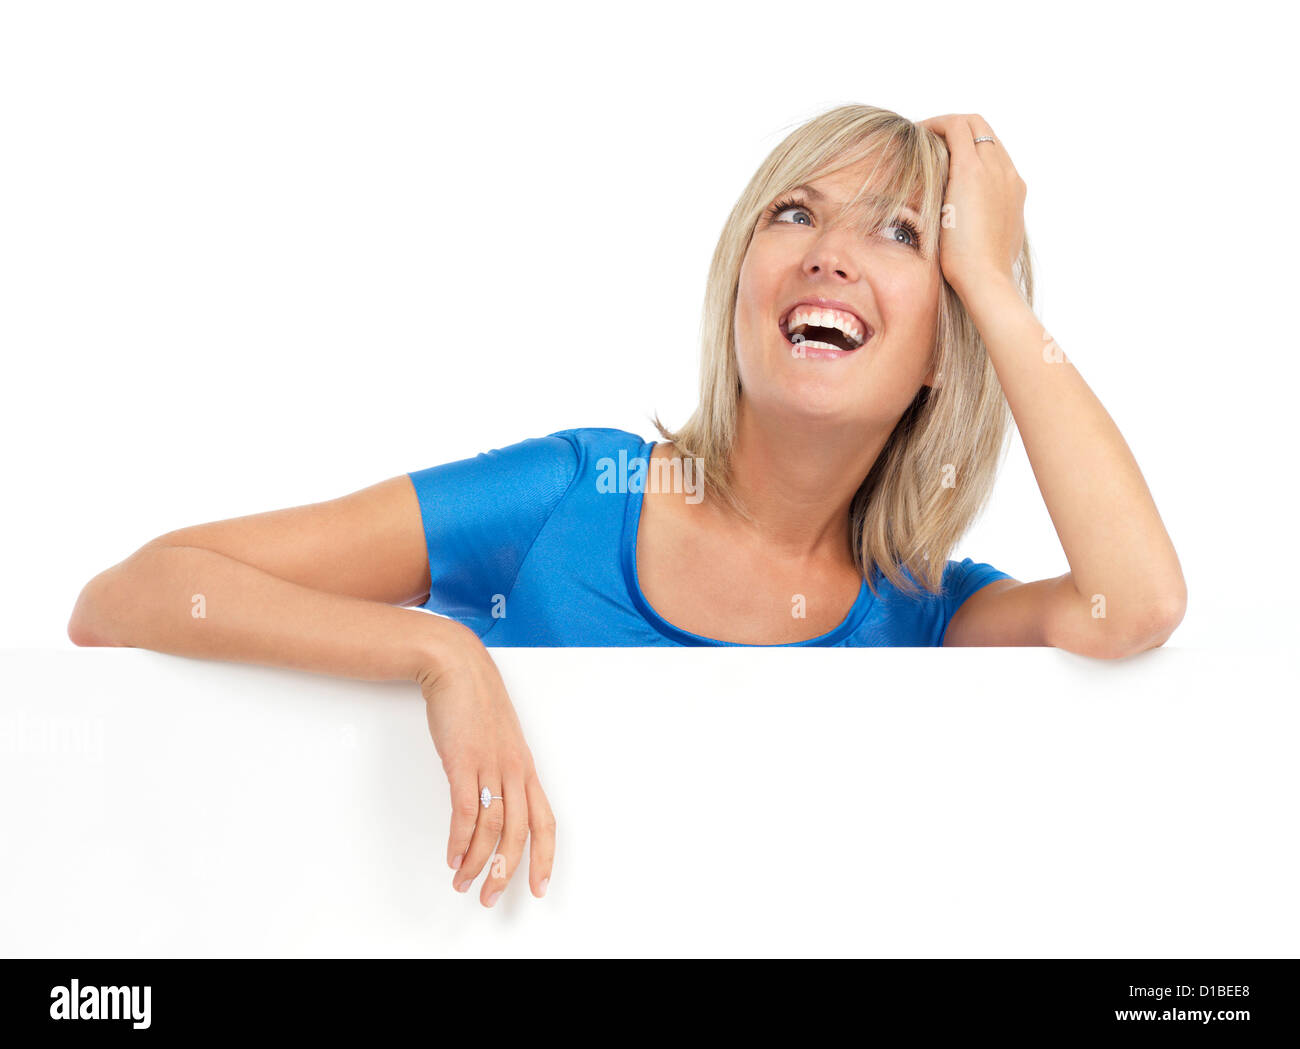 Portrait of a young smiling blond woman looking up with daydreaming expression. Isolated on white background. Stock Photo